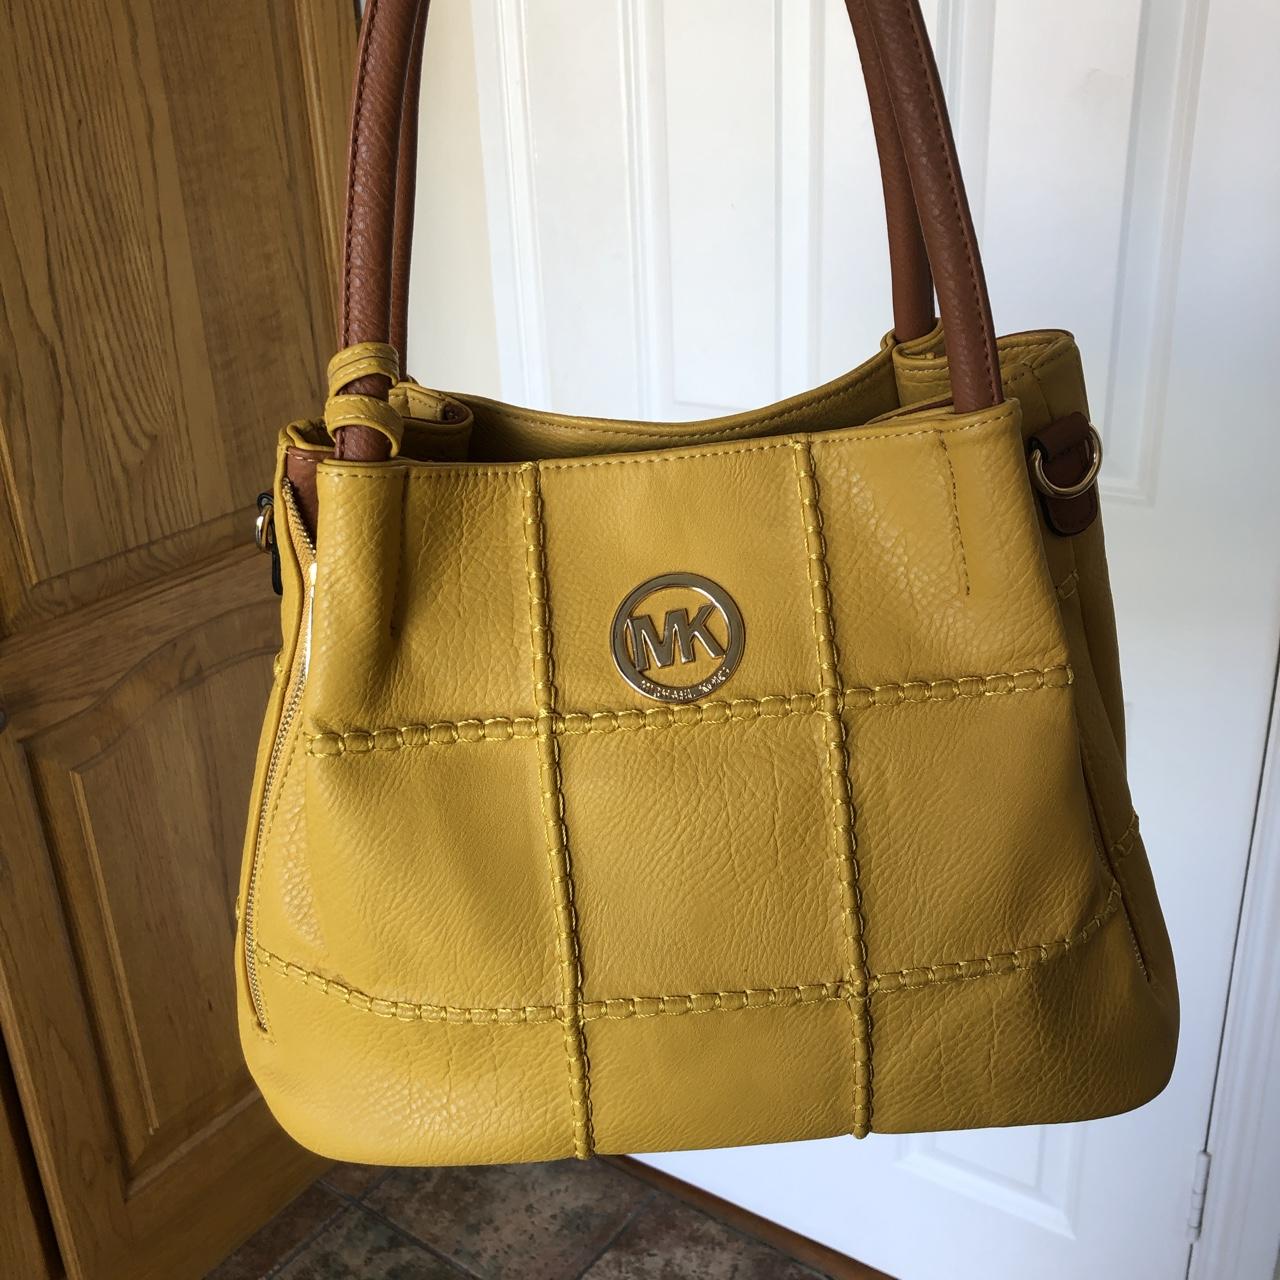 Michael Kors Voyager Large East West Tote Bag Pebbled Leather Marigold  Yellow  eBay